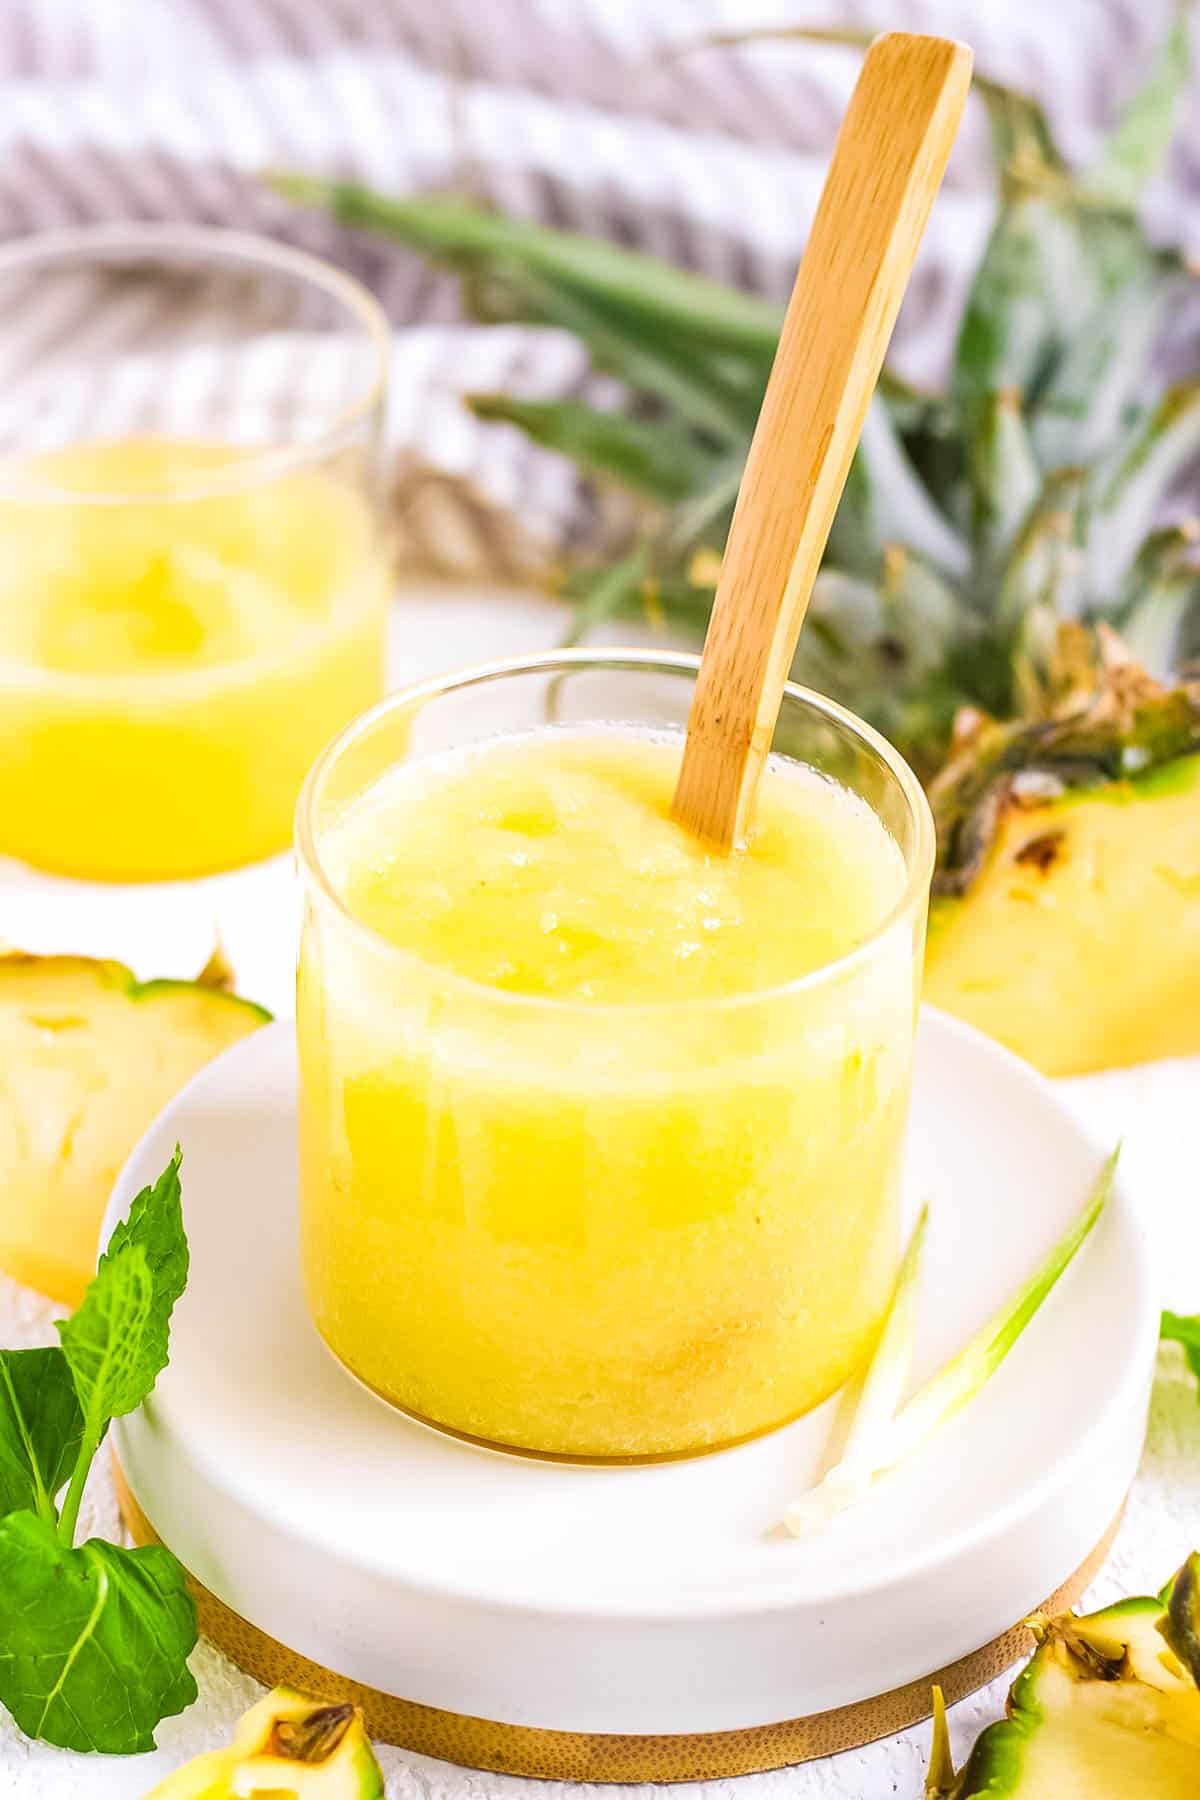 Pineapple puree baby food served in a gl، jar with a wooden s،.